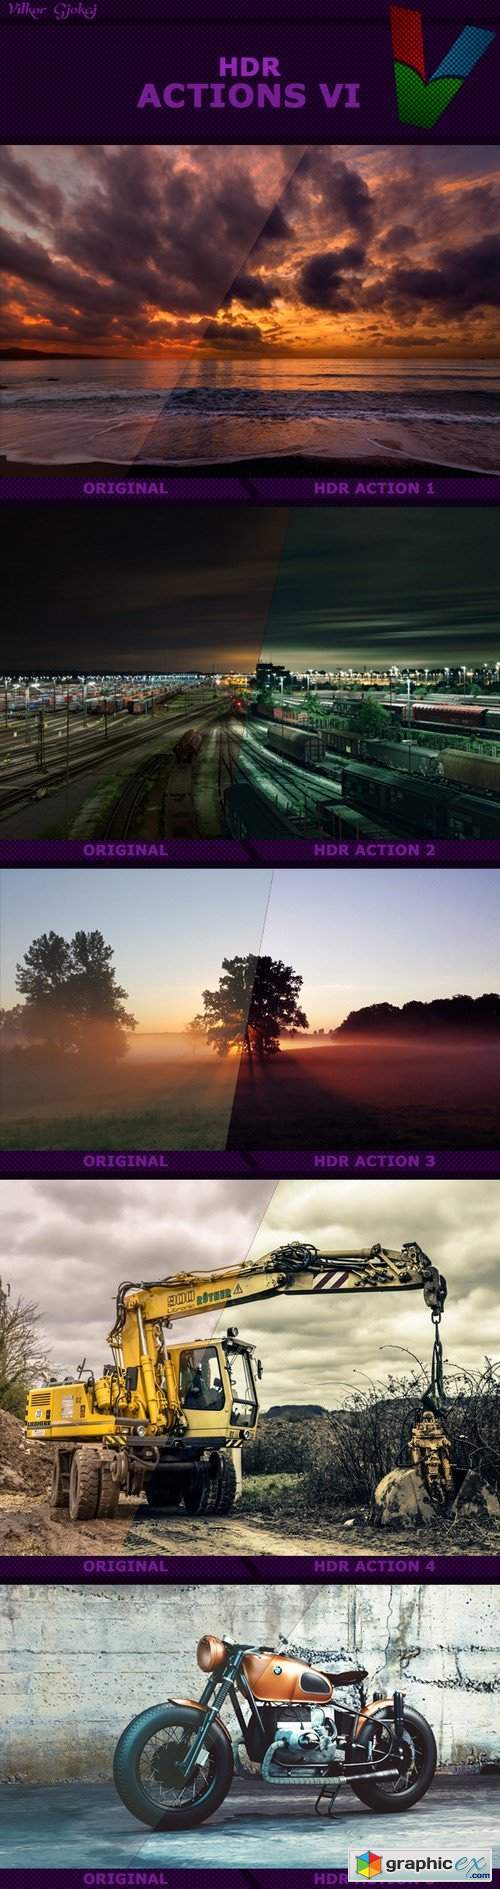 HDR Actions VI